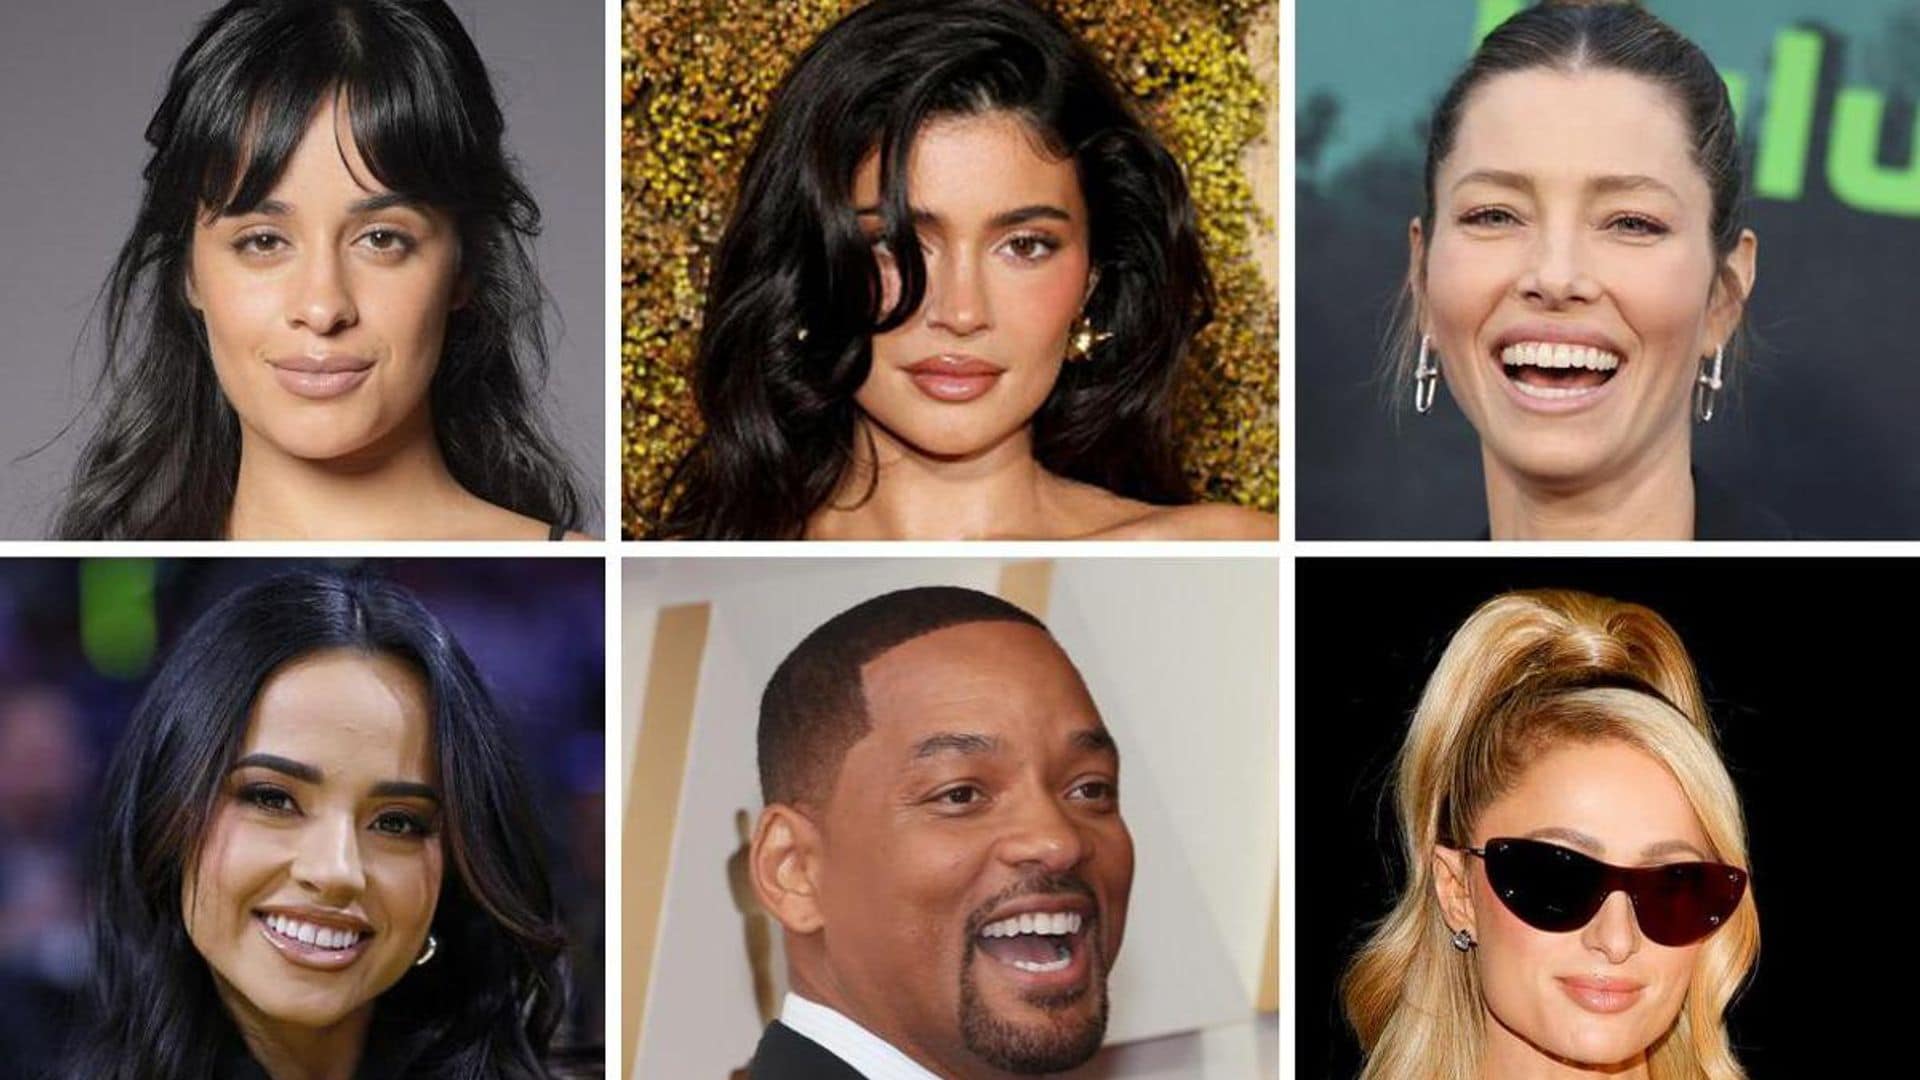 Watch the 10 Best Celebrity TikToks of the Week: Kylie Jenner, Amanda Bynes, Camila Cabello, and more